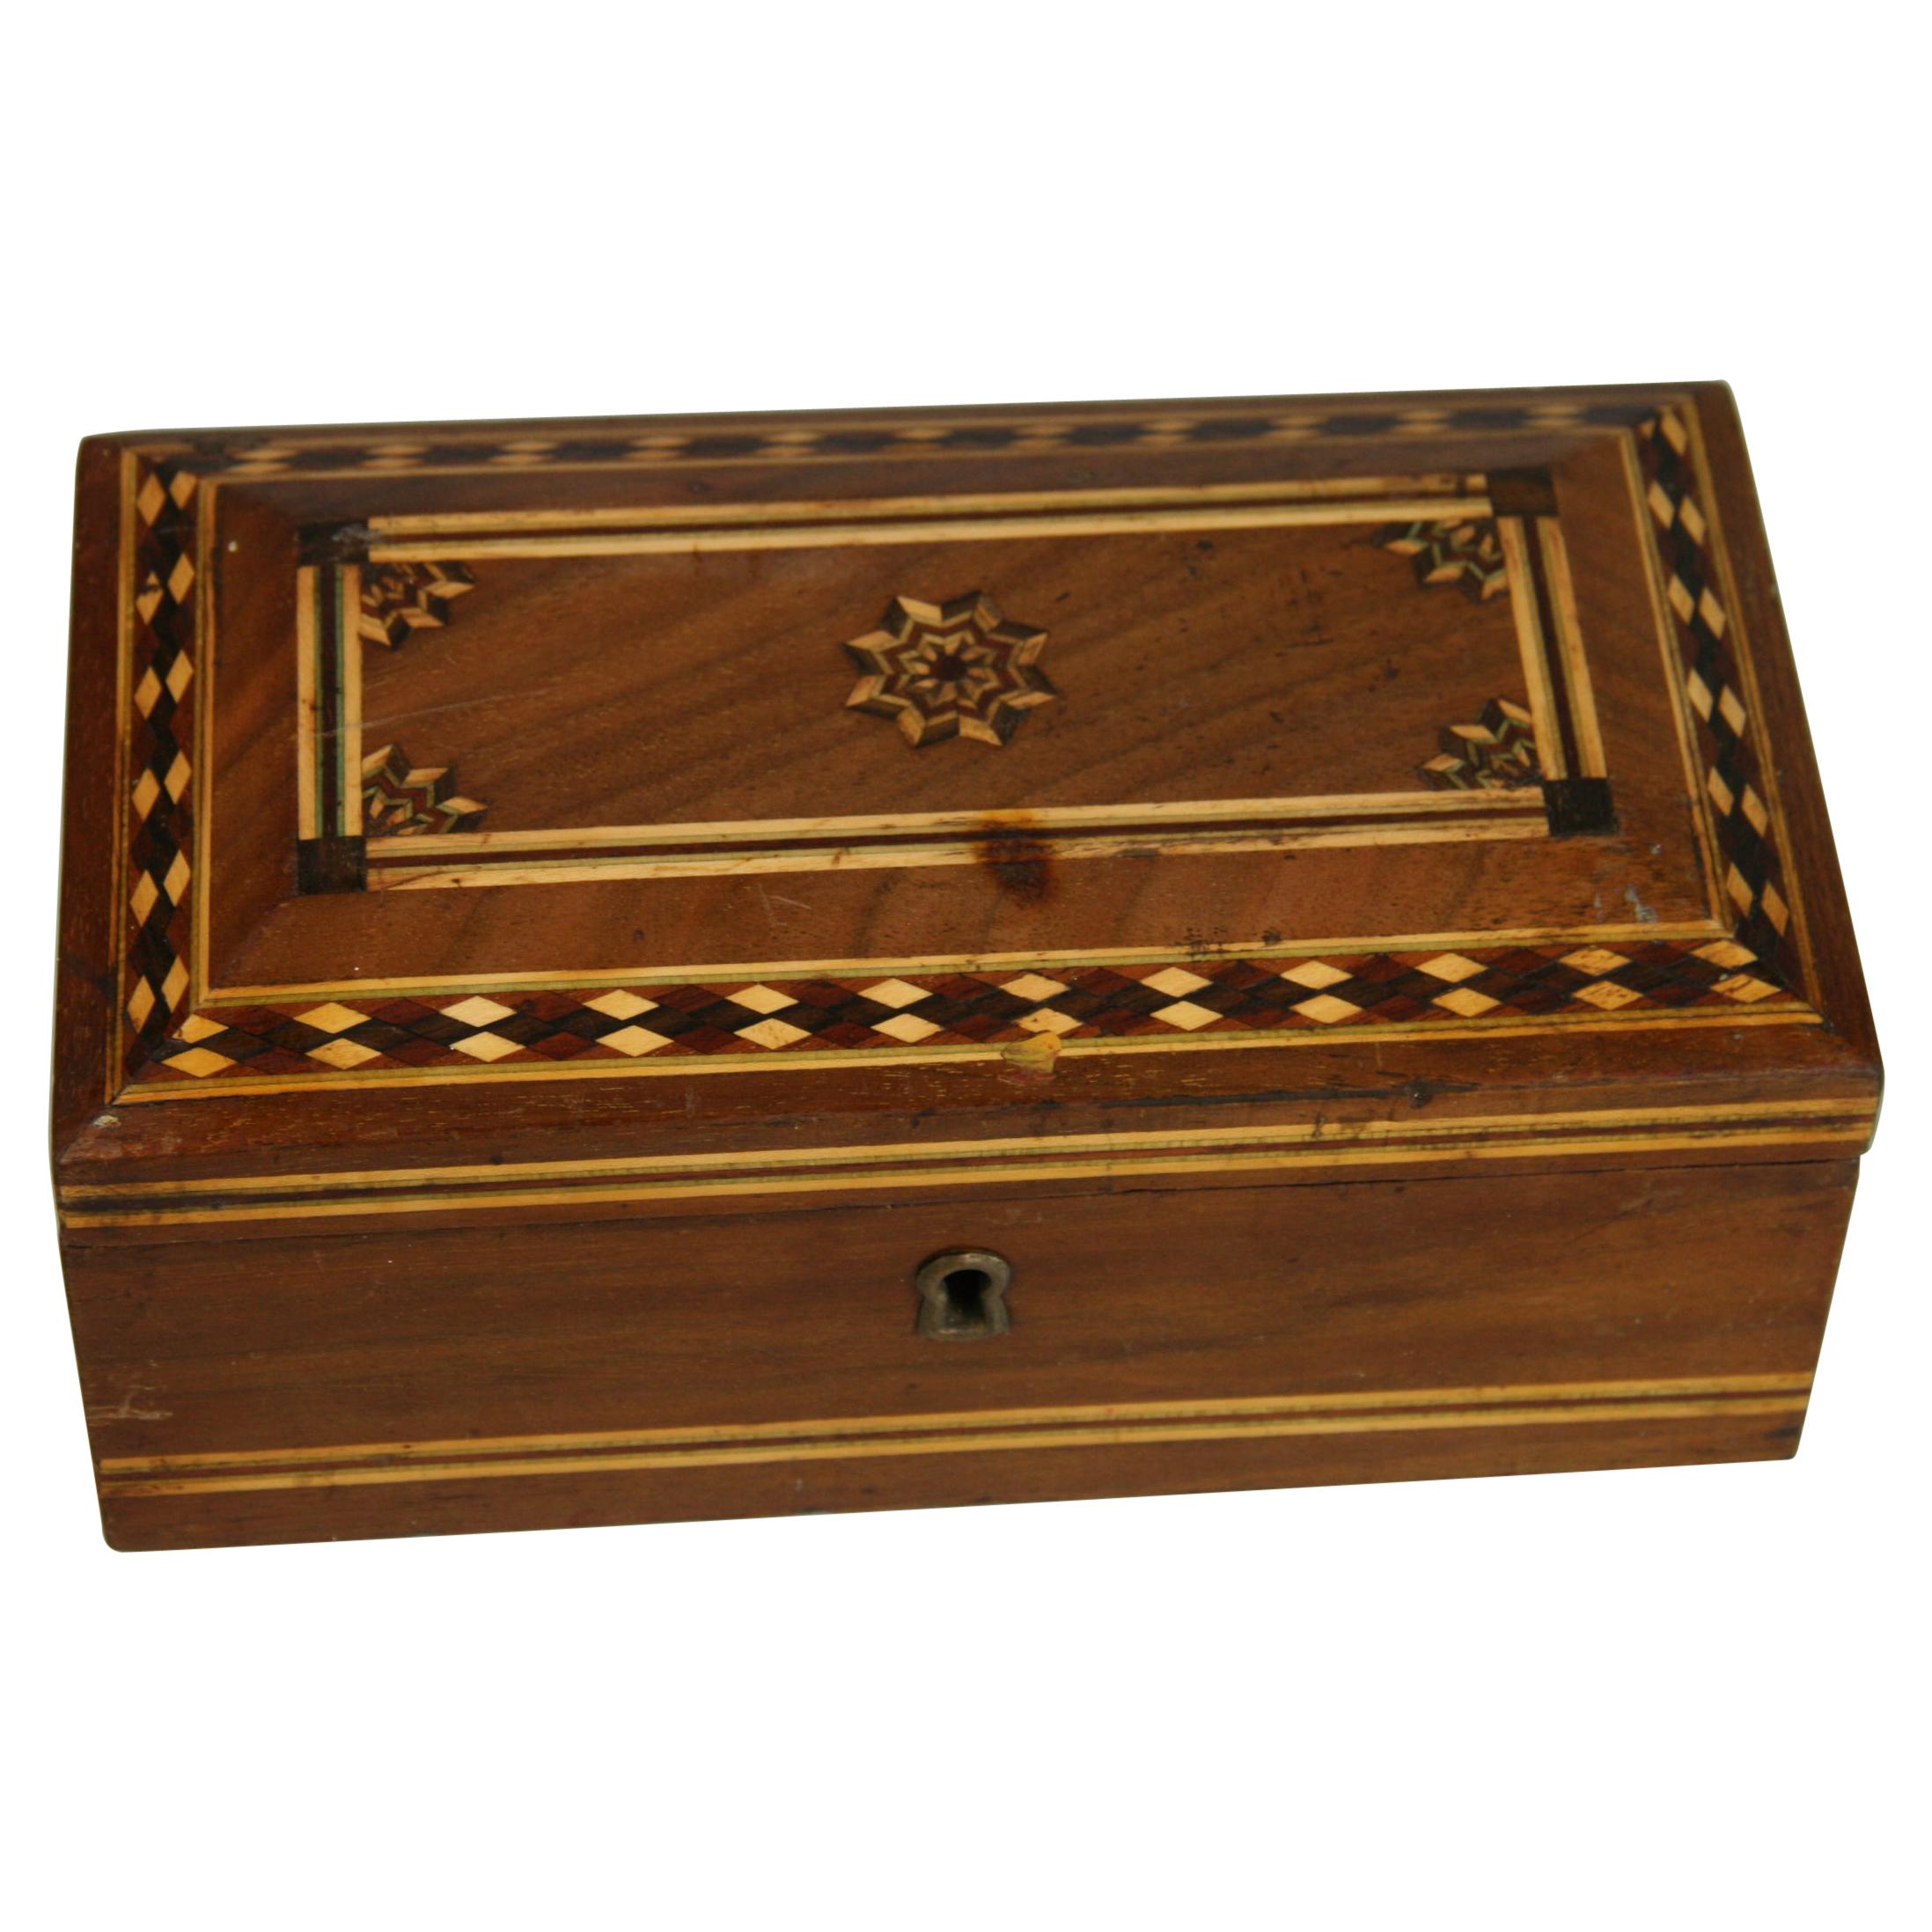 Domed Top Inlaid Wood Box with Metal Liner